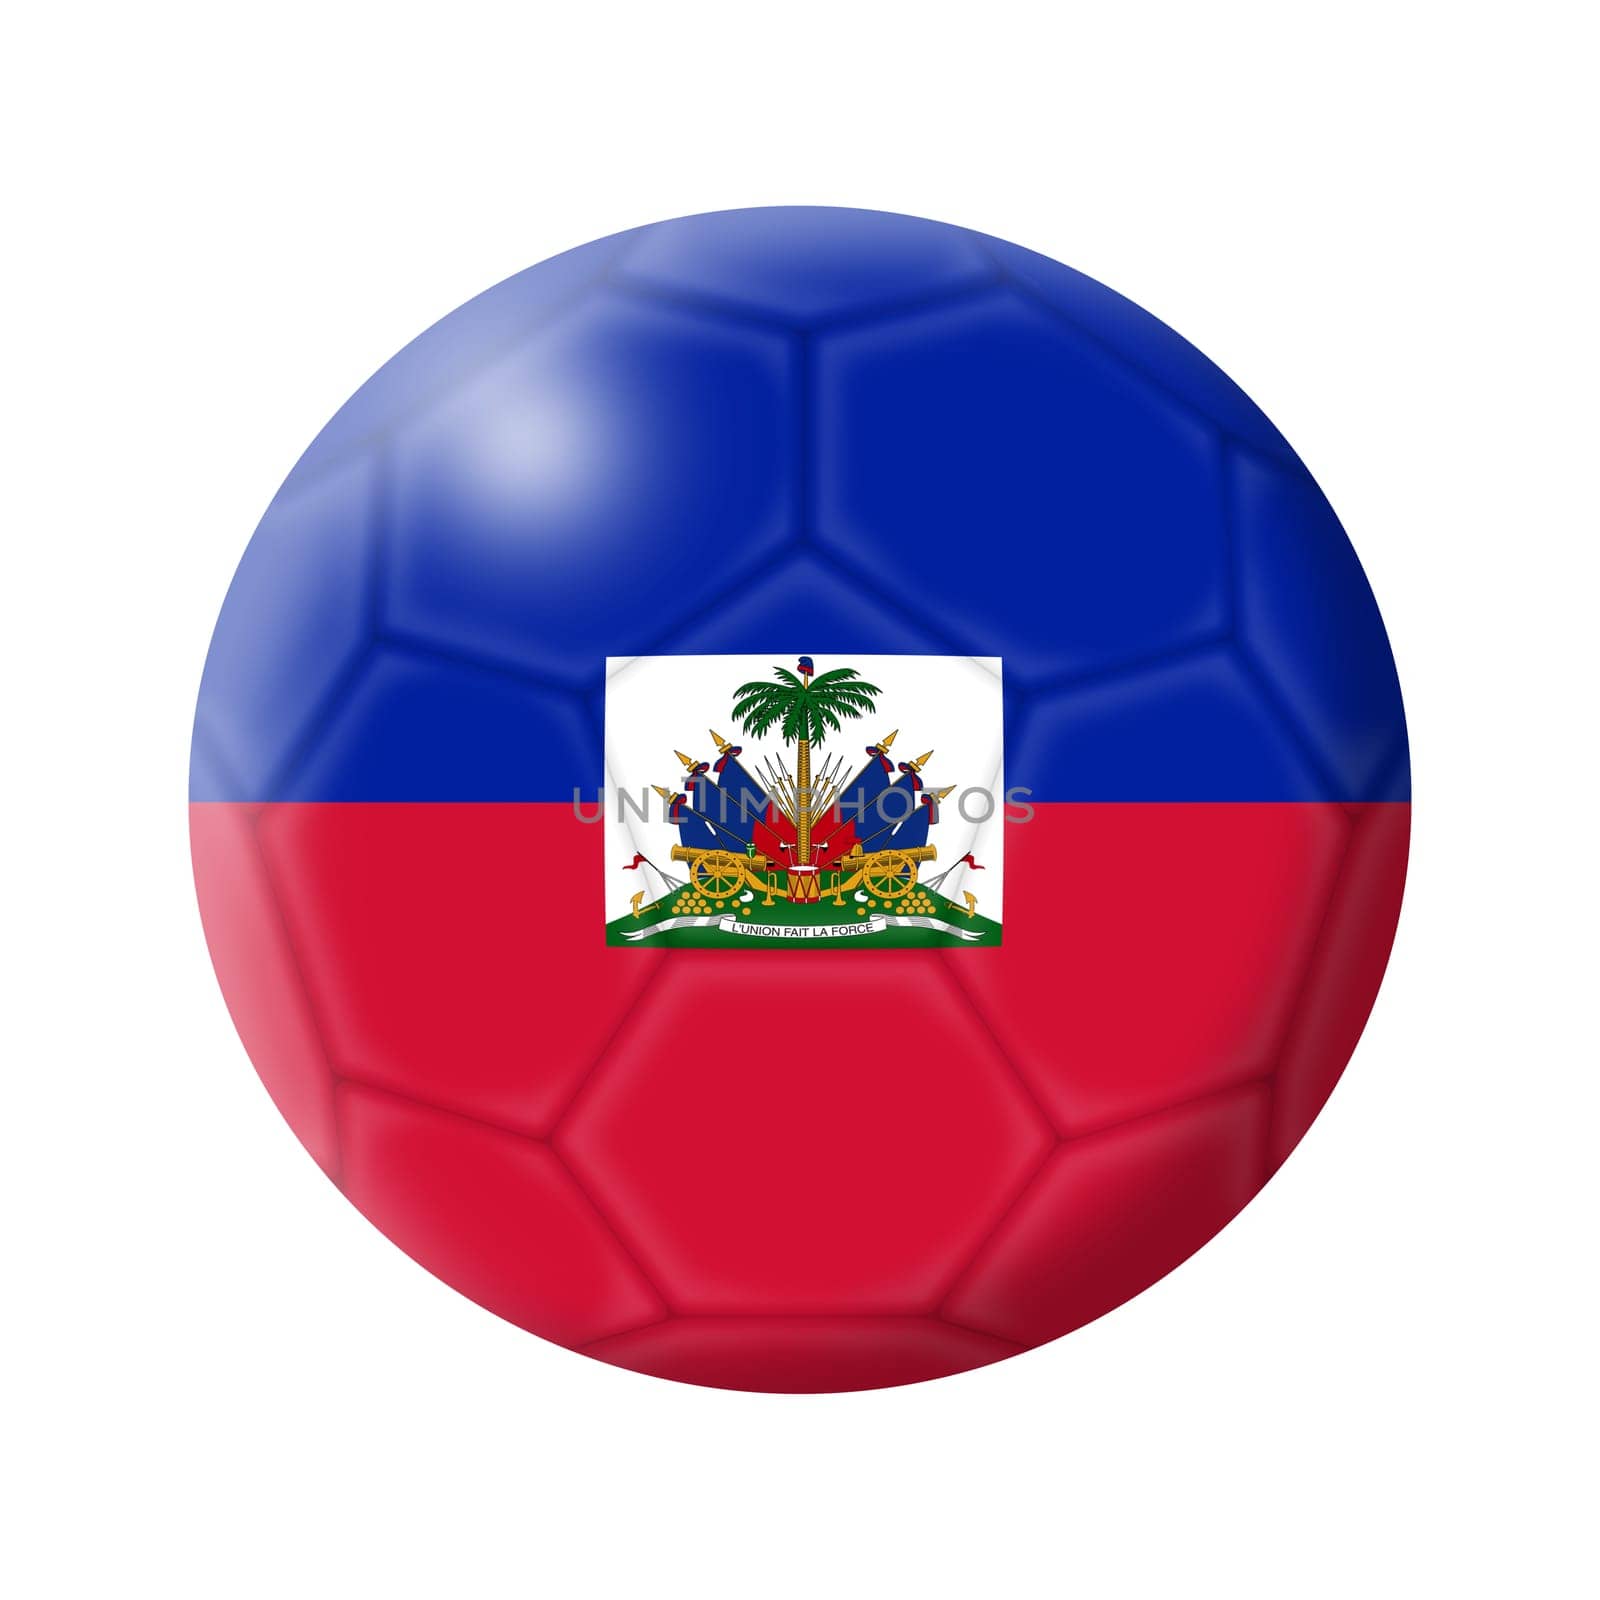 Haiti soccer ball football with clipping path by VivacityImages